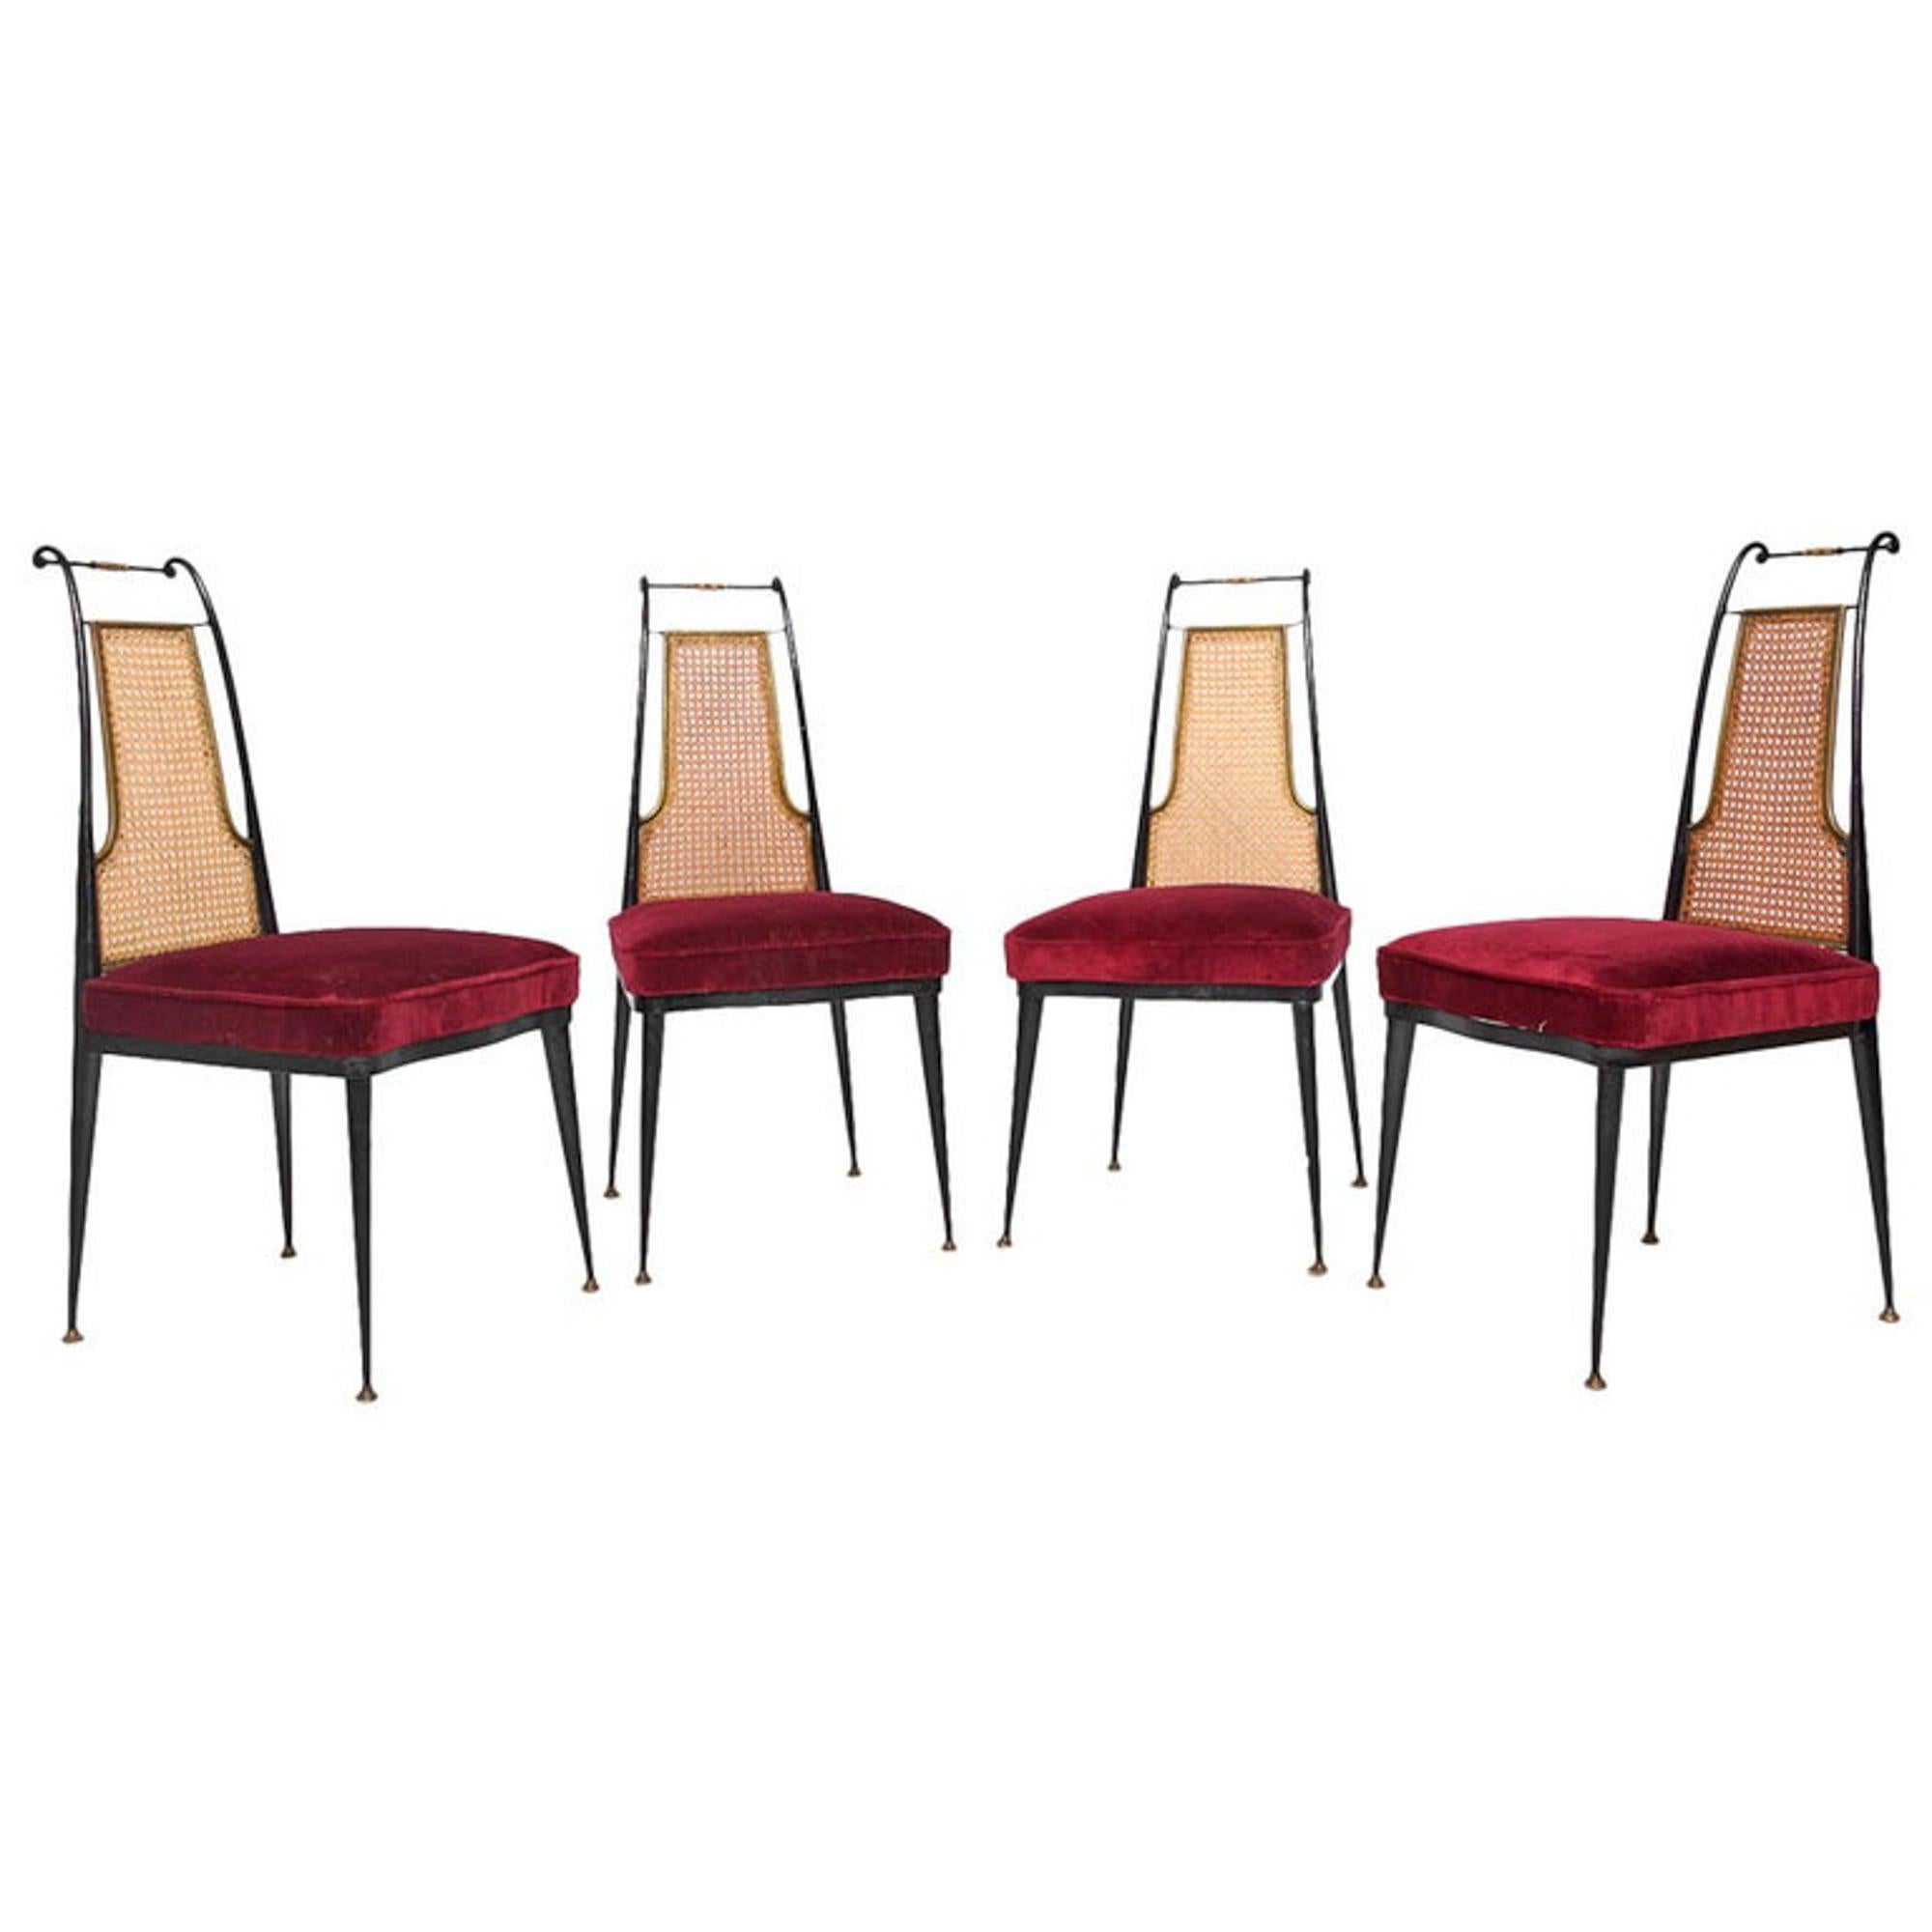 Mexico 1950s: by Mexican Modernist Arturo Pani custom set of our Neoclassical Regency dining chairs in ruby red velvet with brass capped legs.
Chairs feature black painted scrolled iron, woven cane lattice back, brass accents and original red velvet